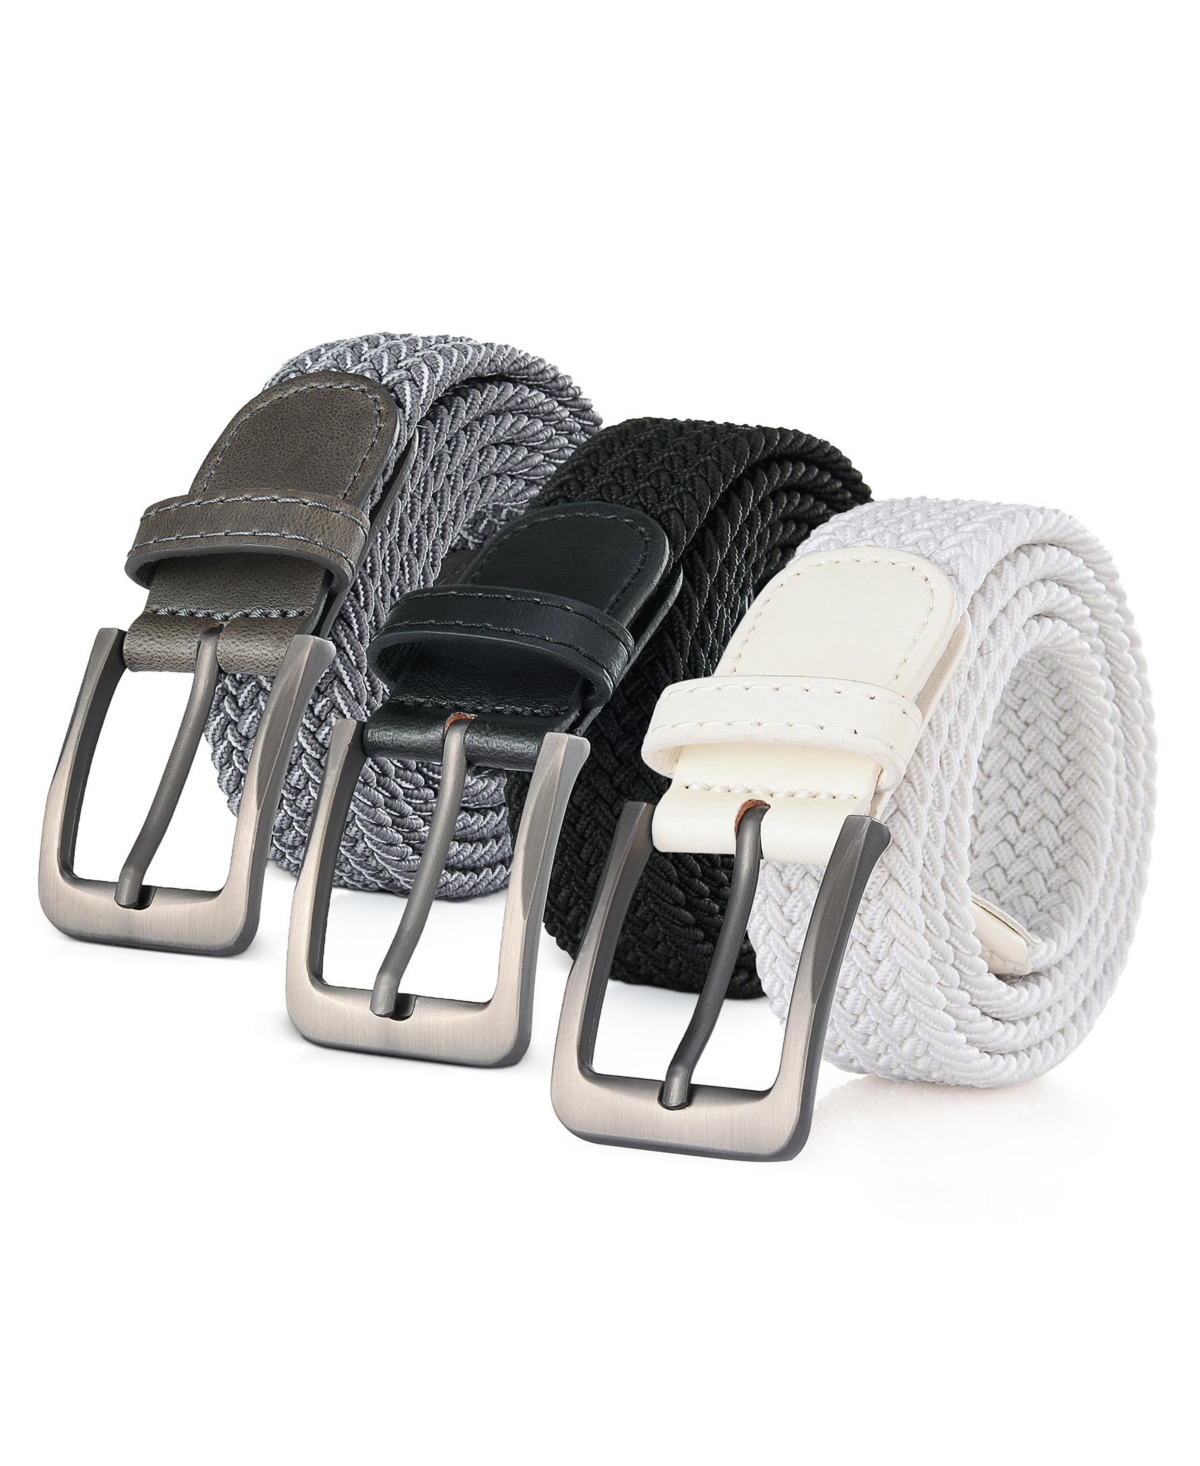 Men's Elastic Braided Stretch Belt for Big & Tall Pack of 3 - Gray/brown/navy